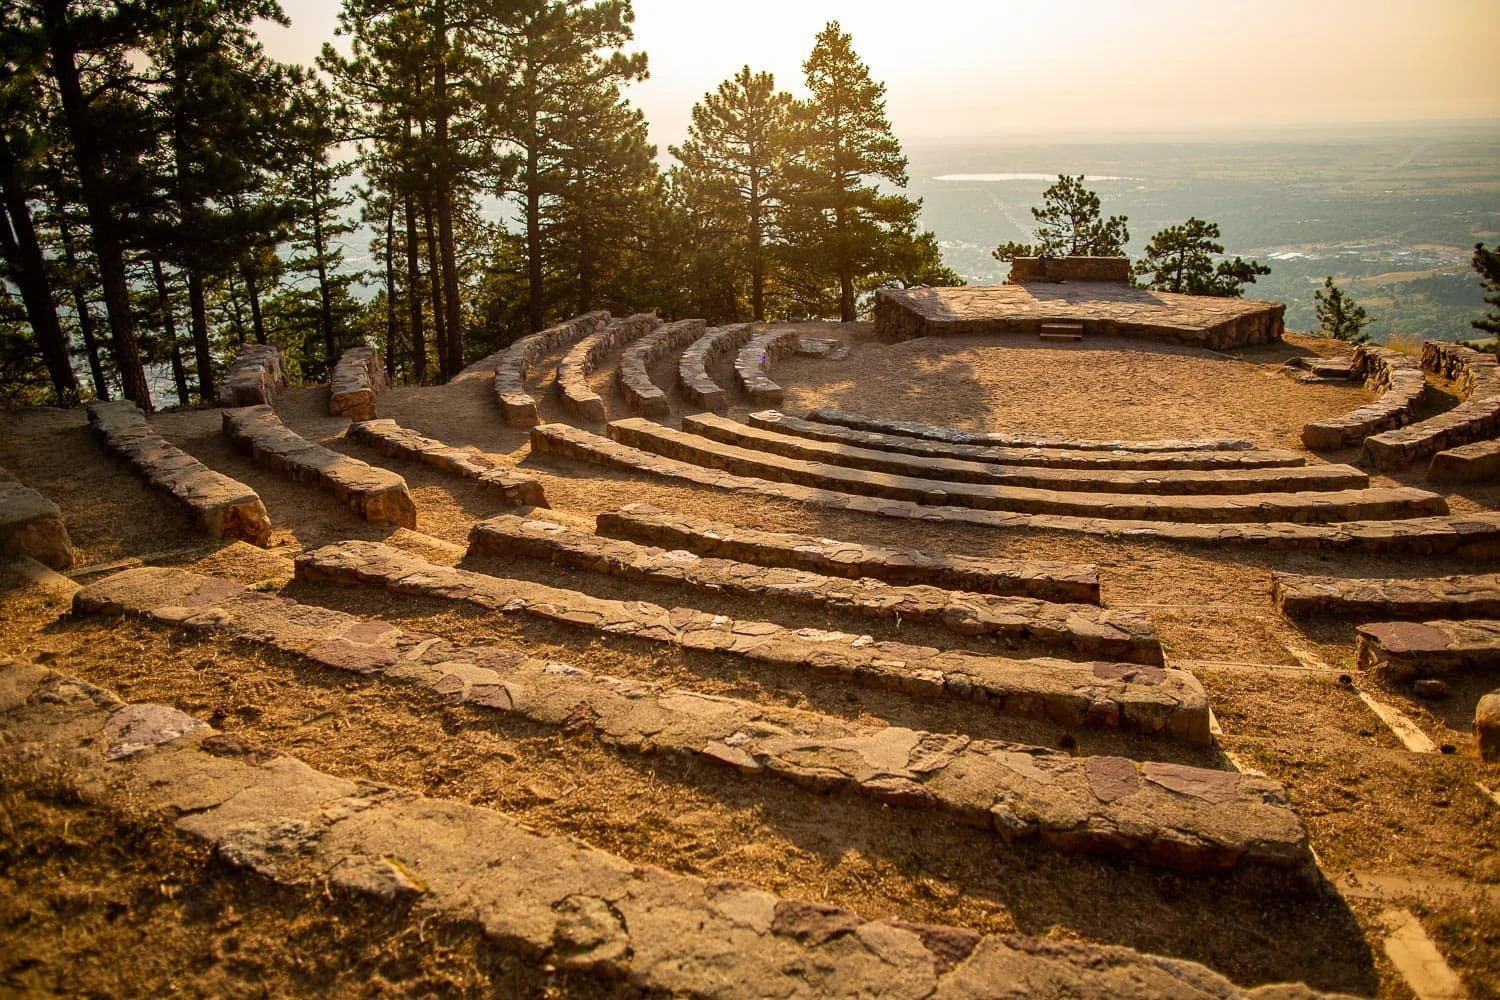 Sunrise amphitheater, a reserveable elopement location in Boulder, is seen here at sunrise.